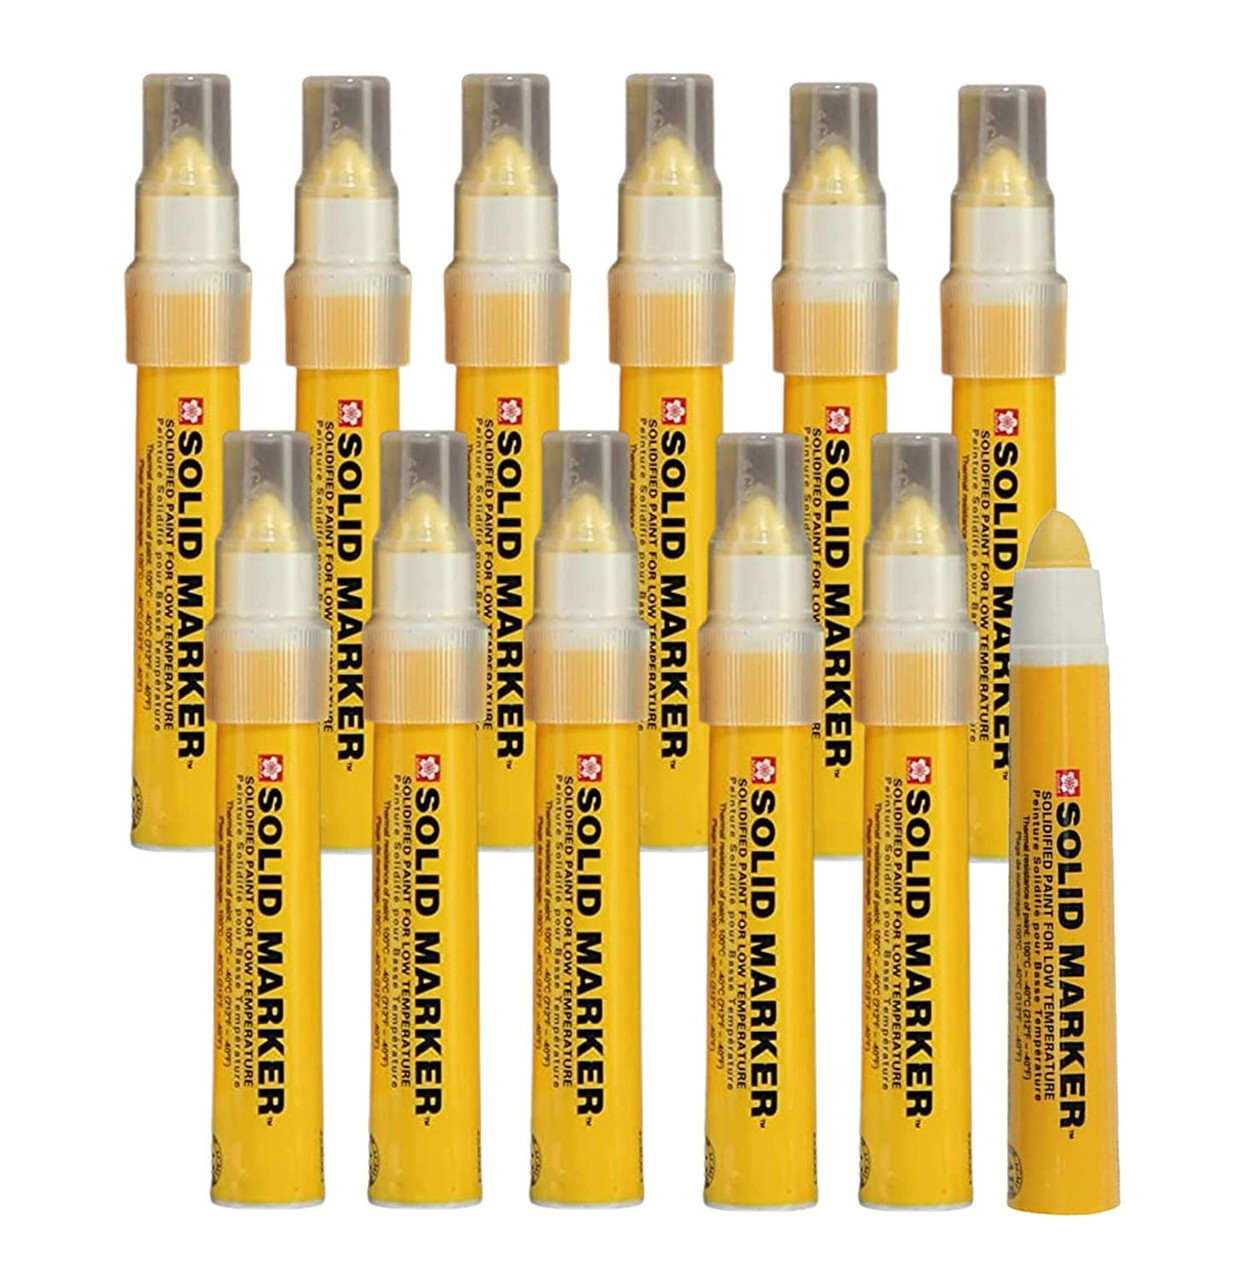 Yellow Dr. Paint Reversible Tip Paint Markers 12 ct (While Supplies Last)